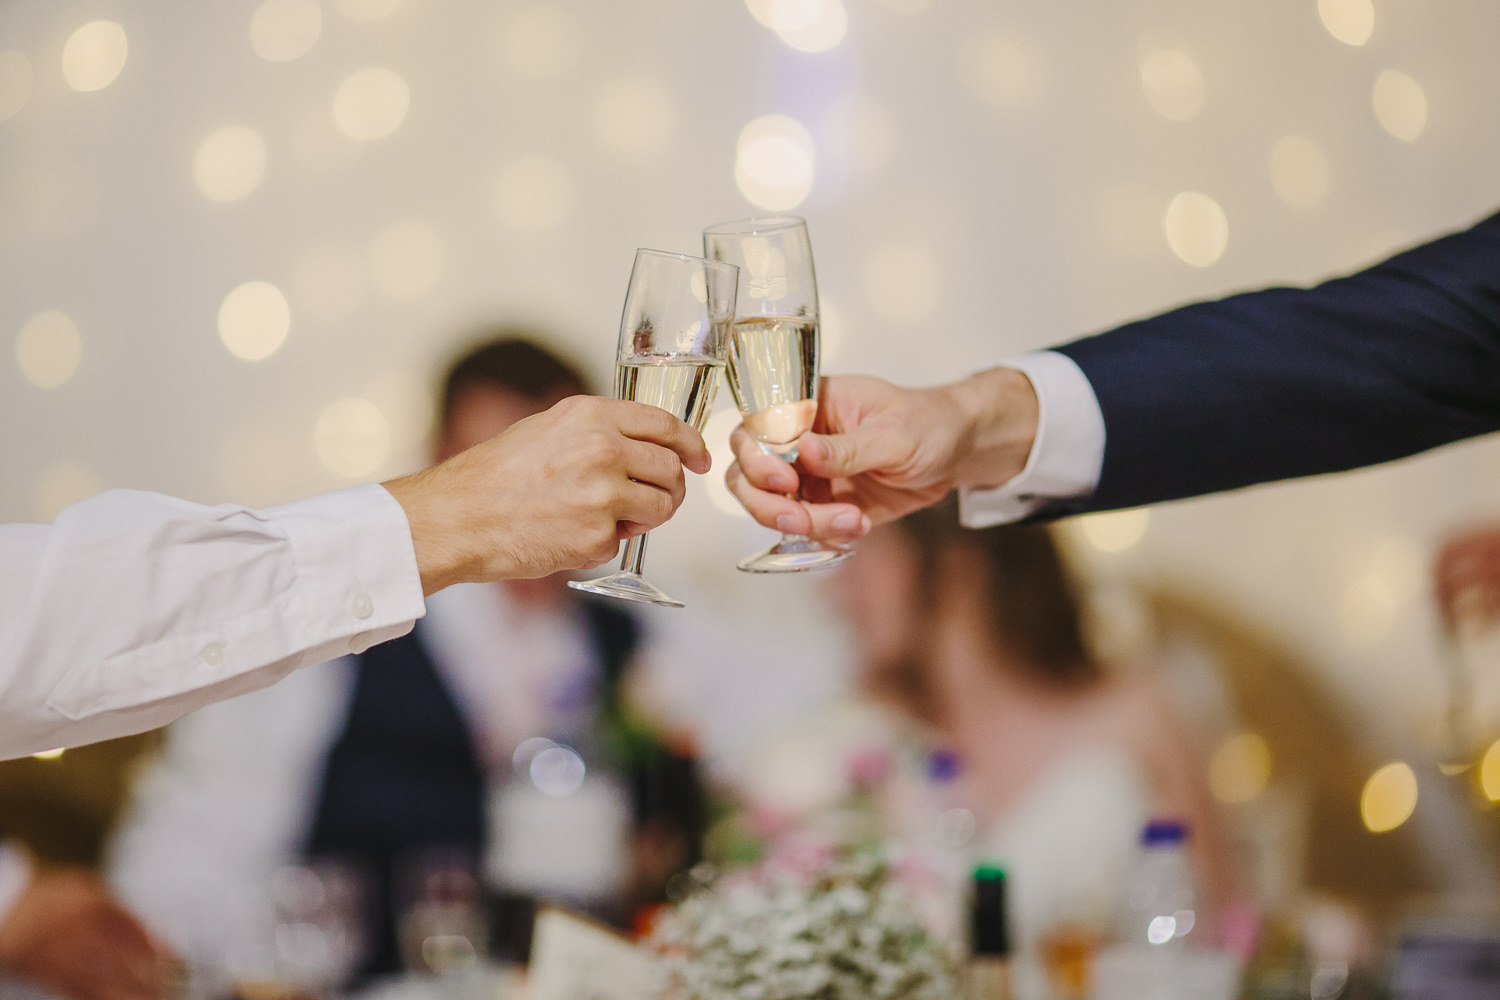 Champagne glasses clinking during a wedding reception.